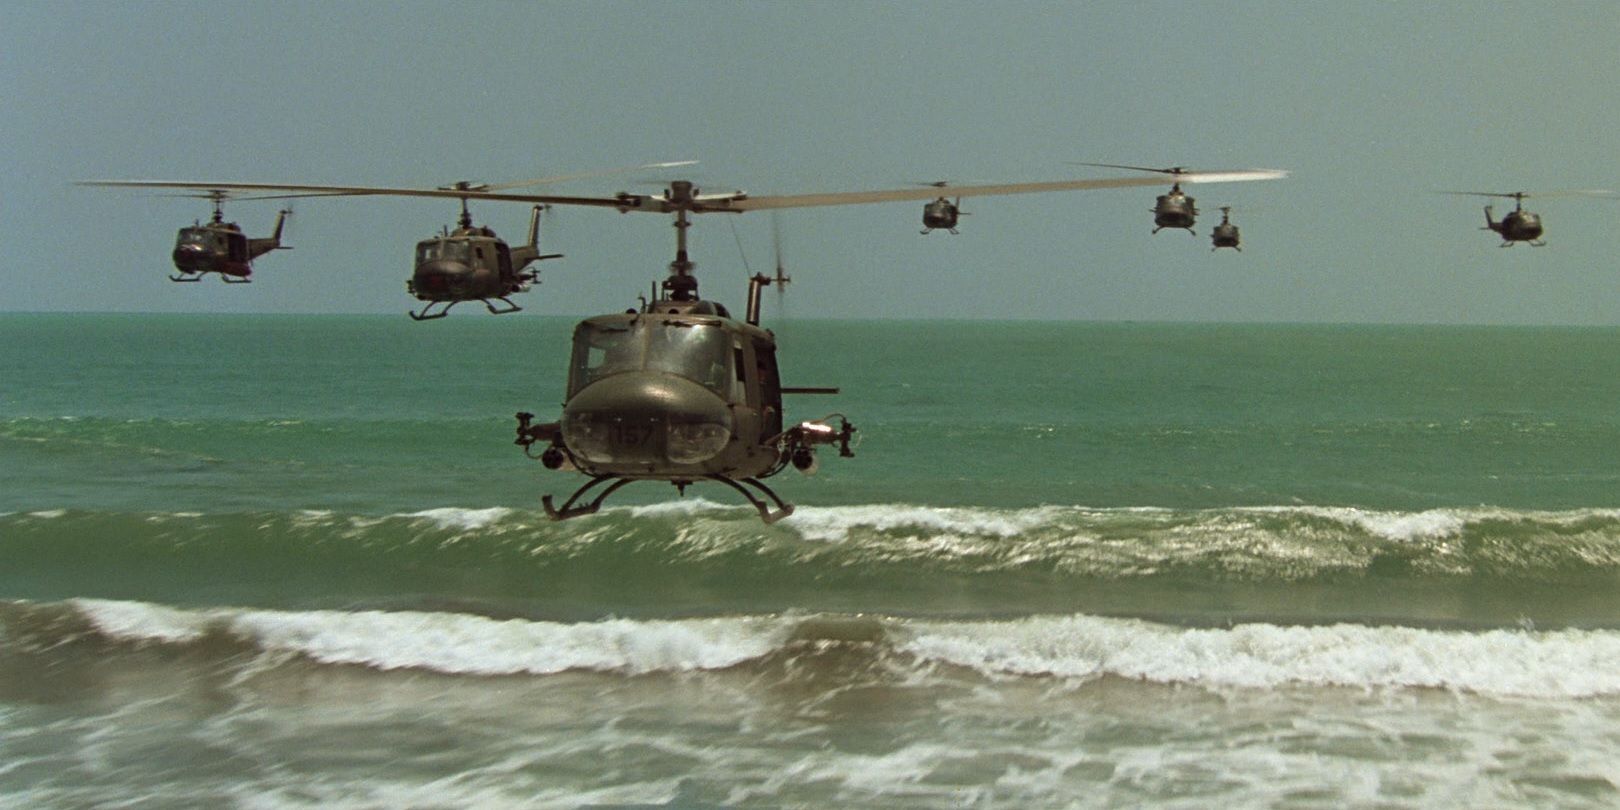 The helicopter attack in Apocalypse Now